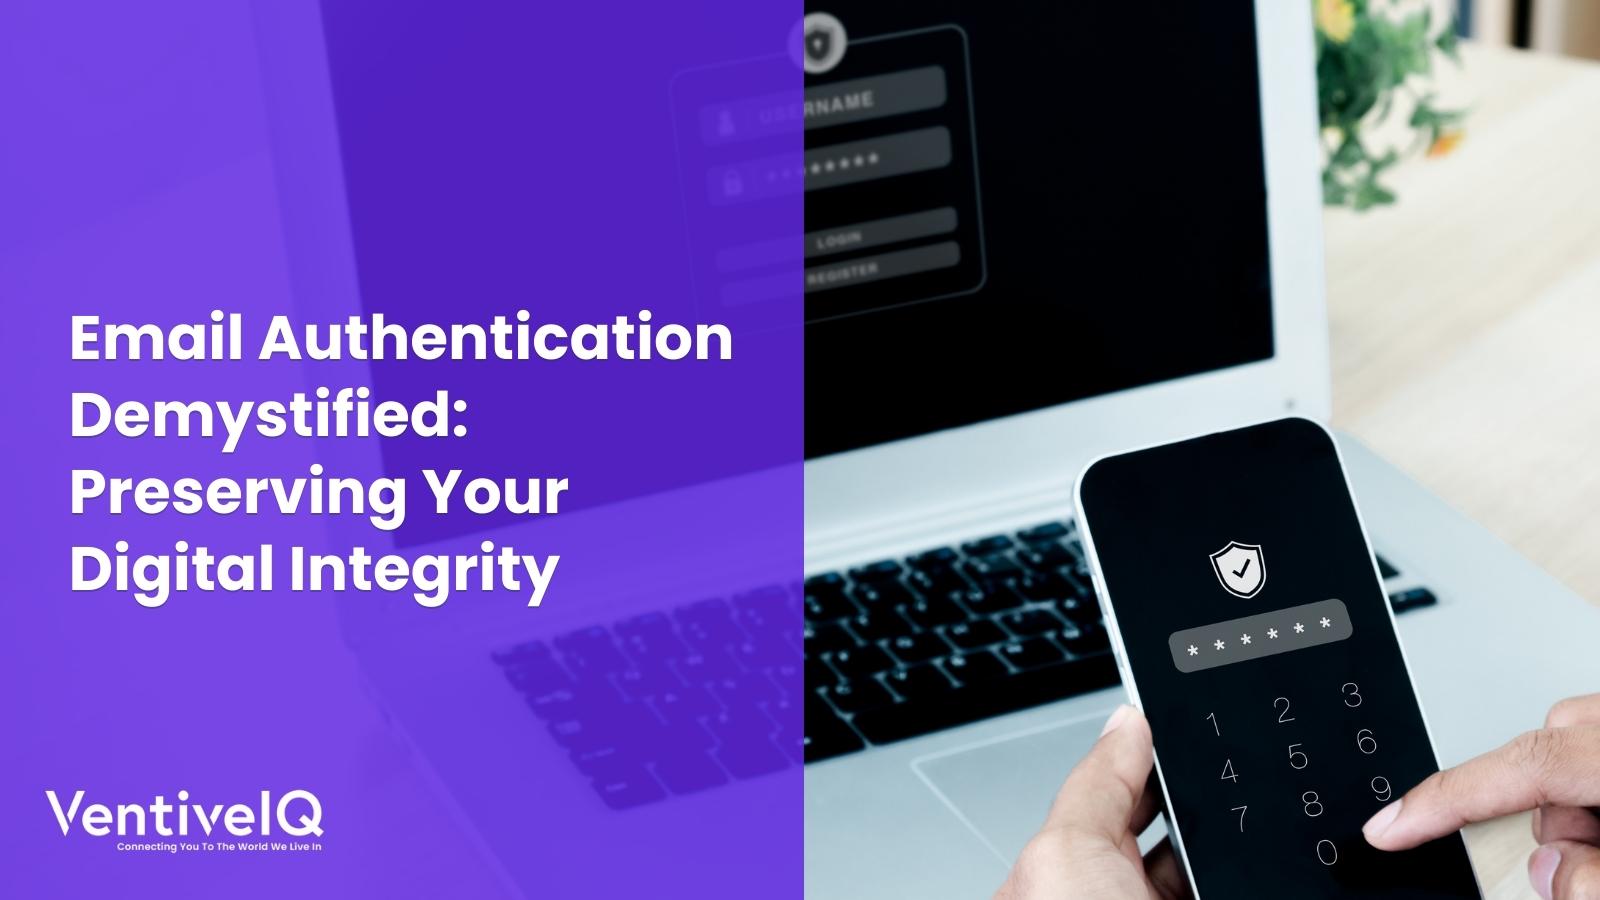 Email Authentication Demystified: Preserving Your Digital Integrity